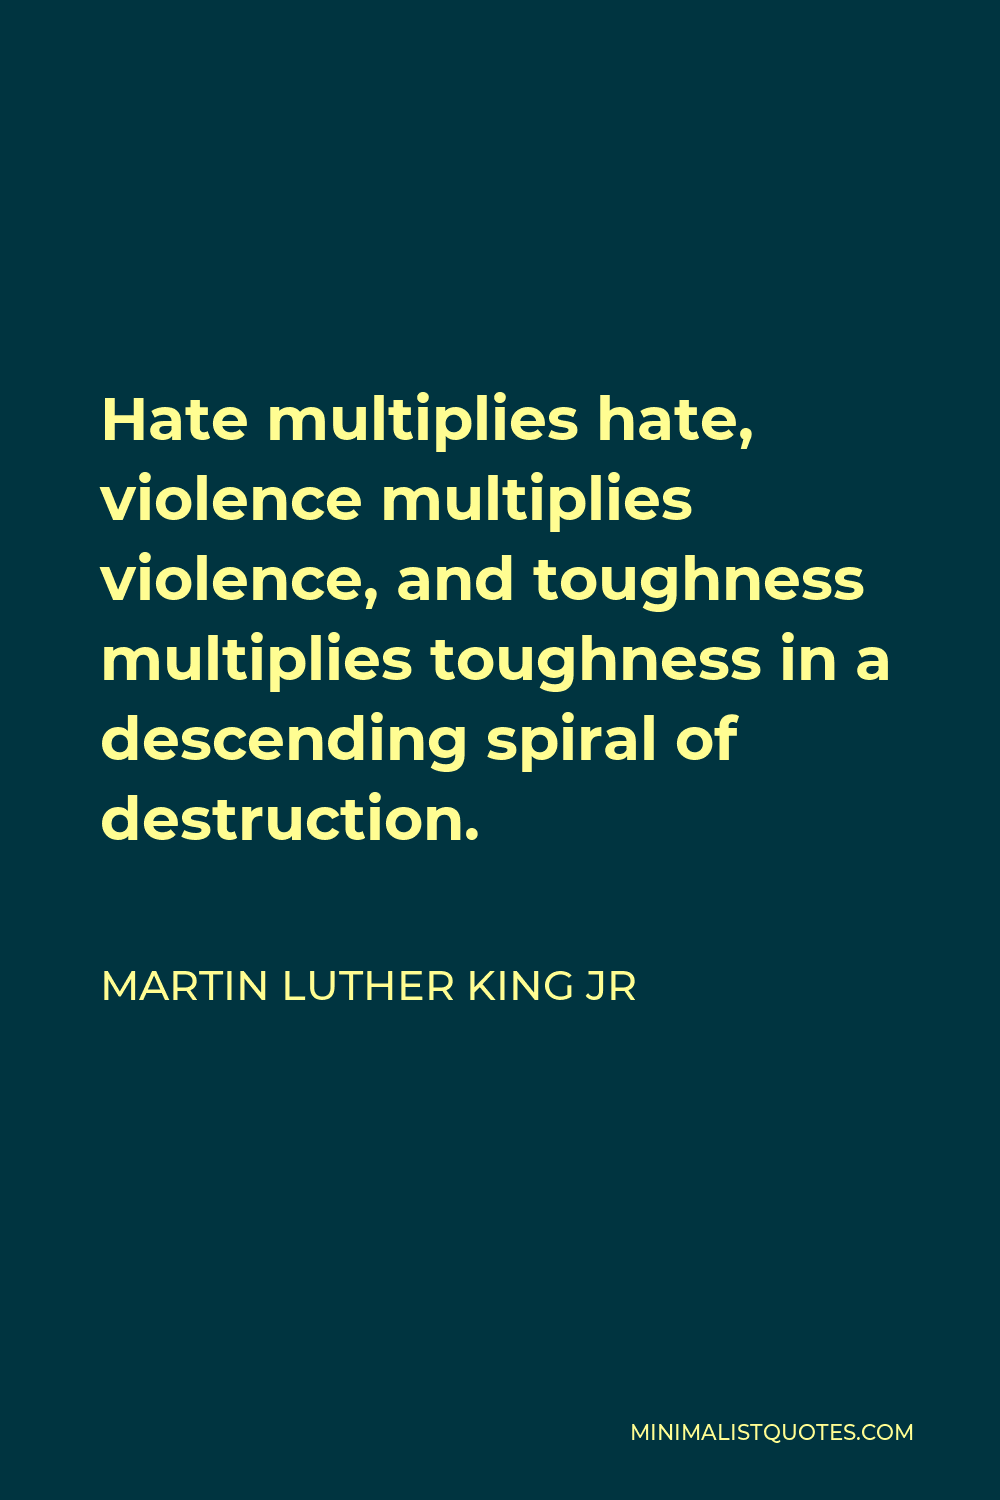 Martin Luther King Jr Quote - Hate multiplies hate, violence multiplies violence, and toughness multiplies toughness in a descending spiral of destruction.